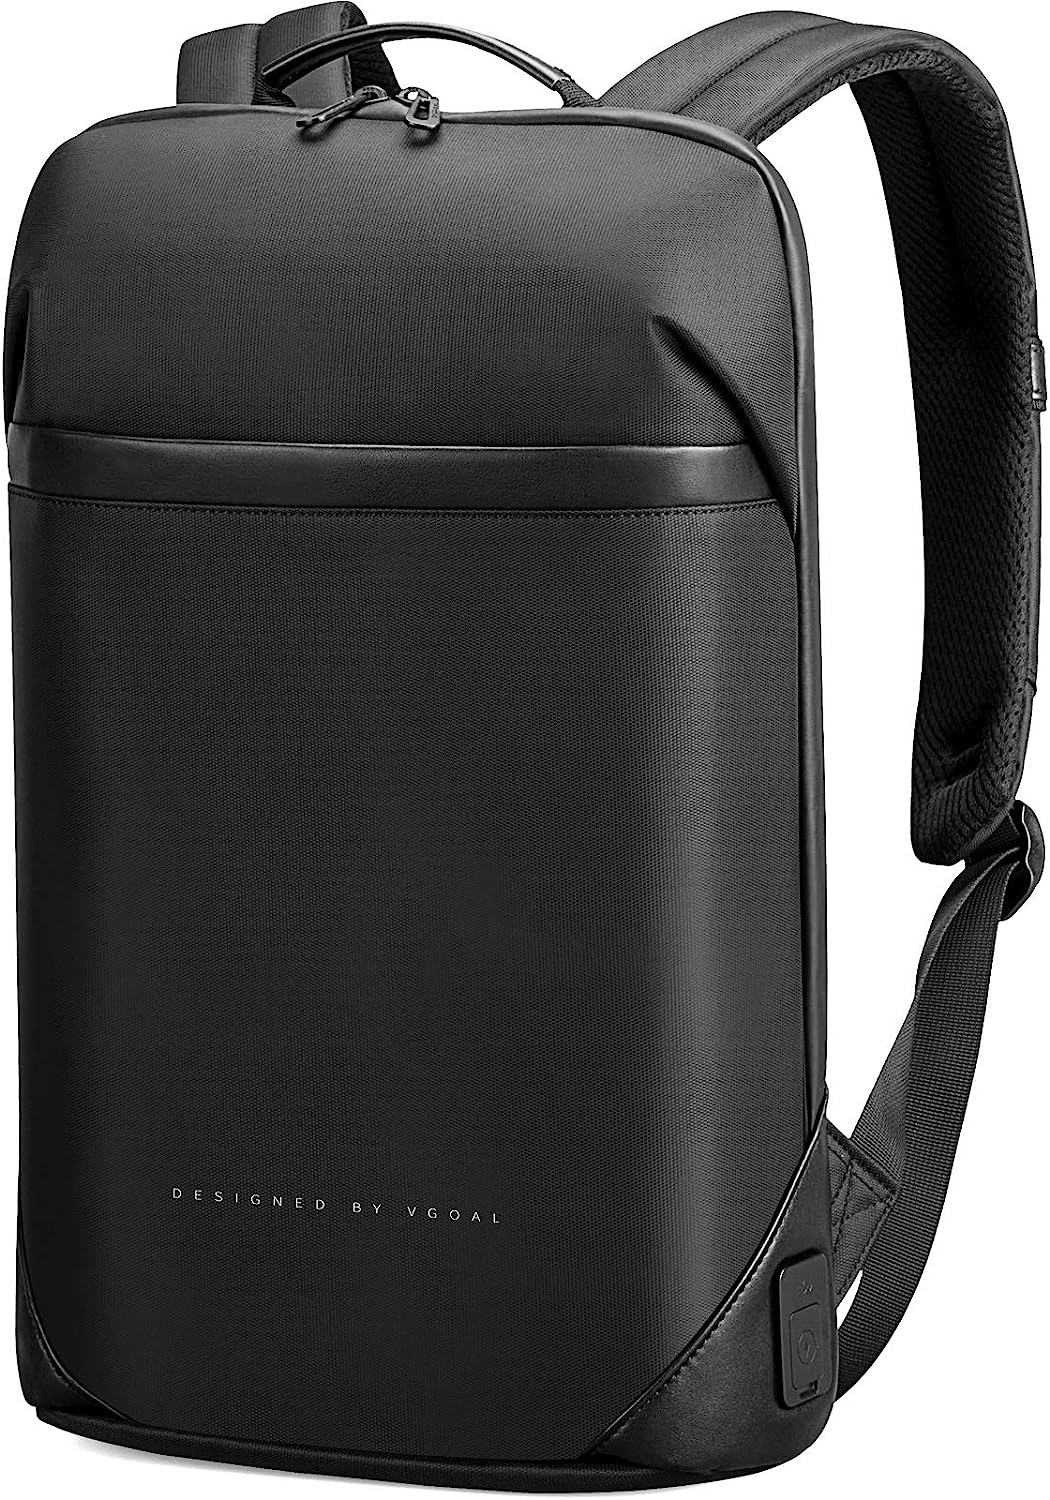 VGOAL 15.6 Inch Laptop Backpack Business Travel Anti- [...]